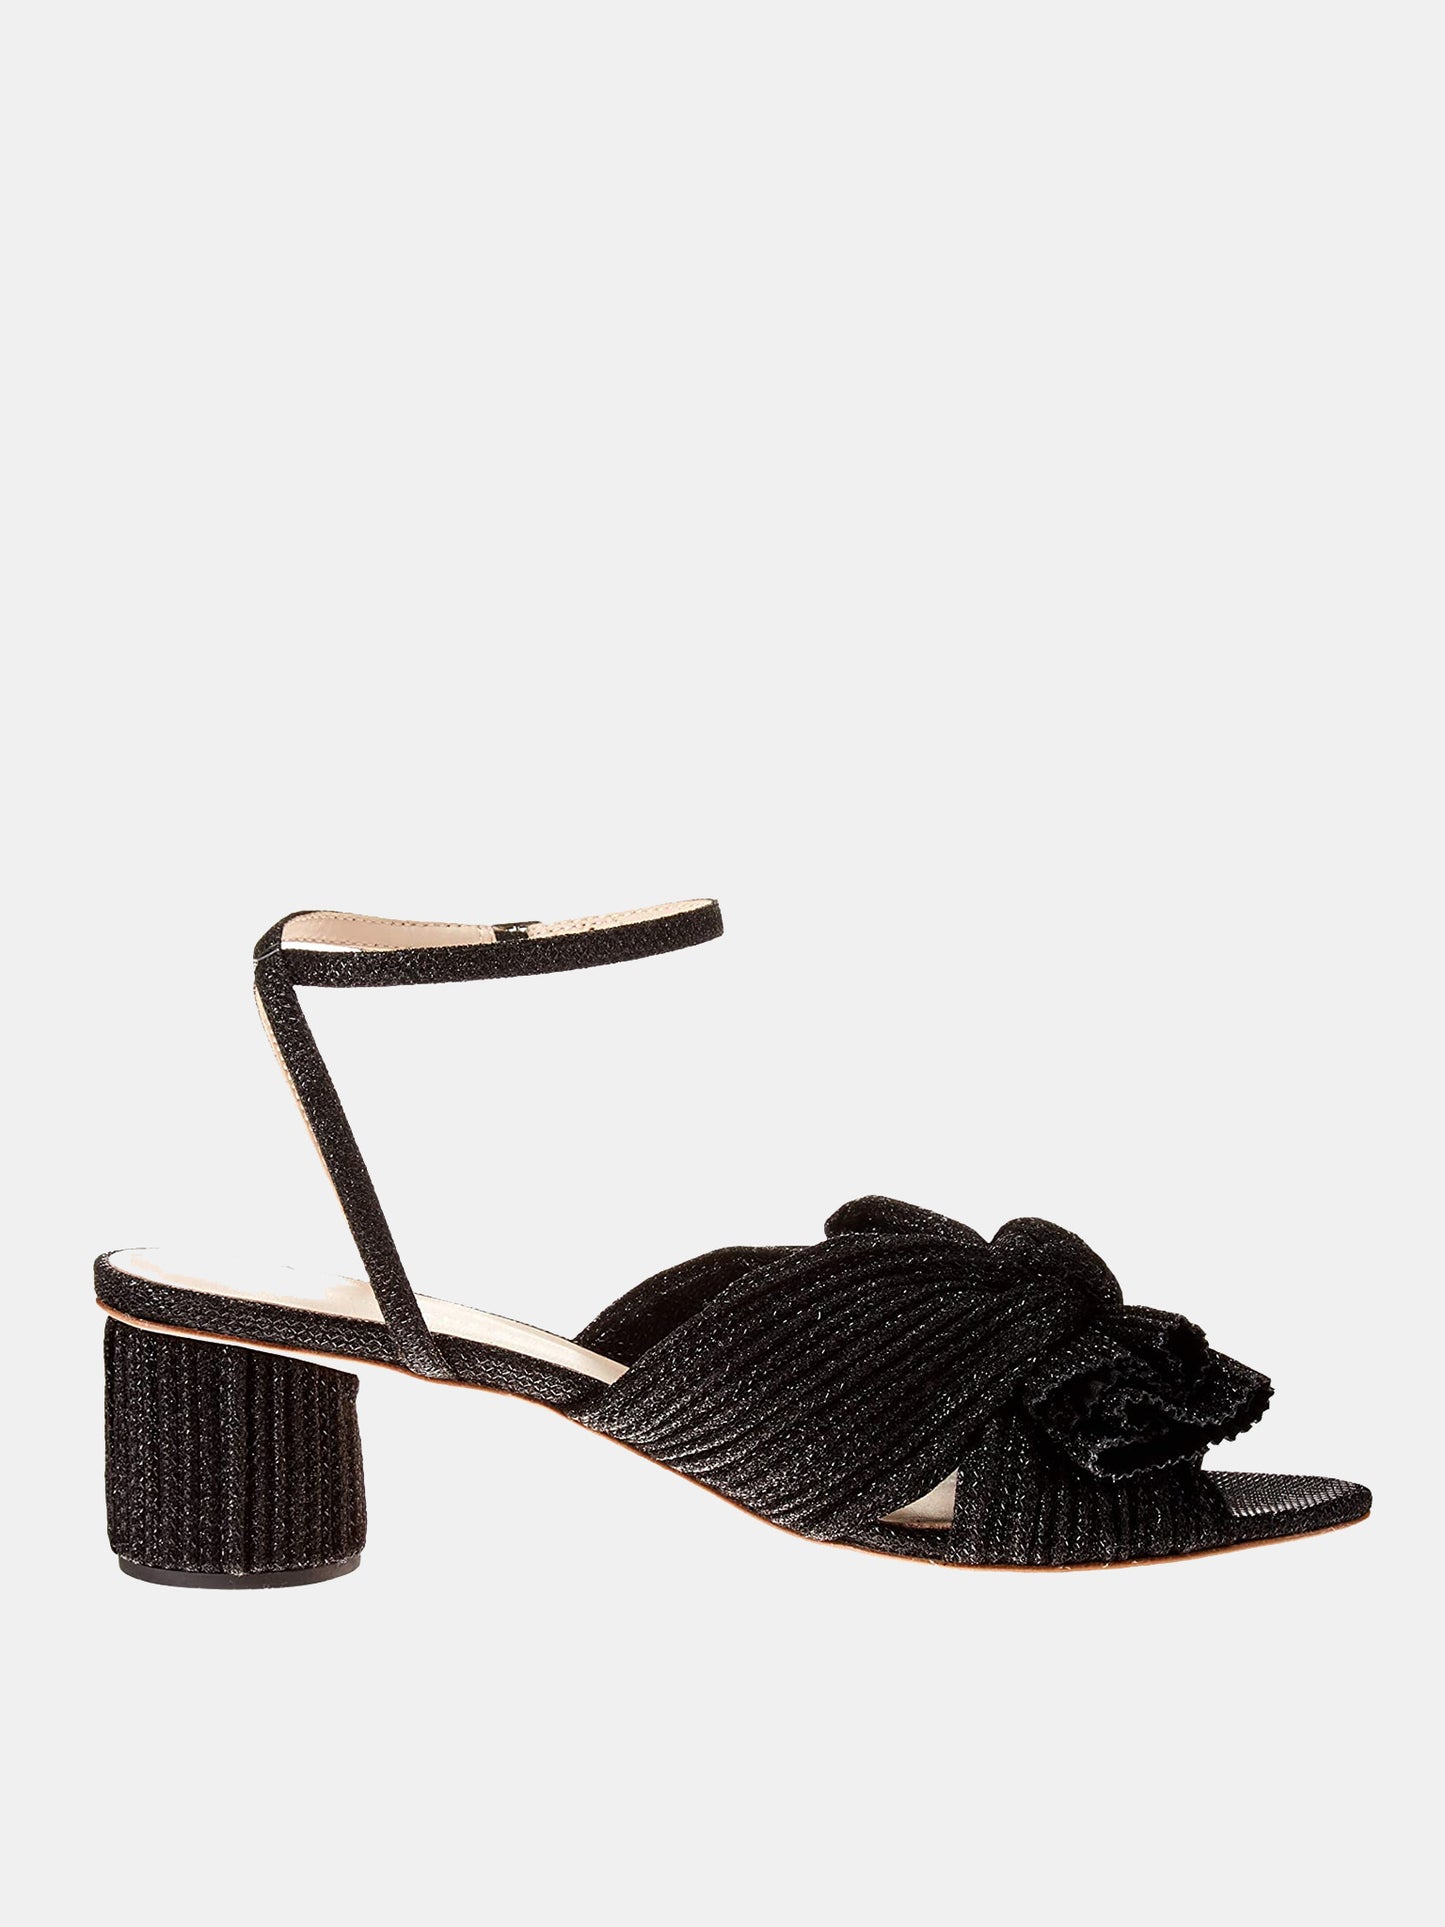 Loeffler Randall Dahlia Bow Low Heel with Ankle Strap